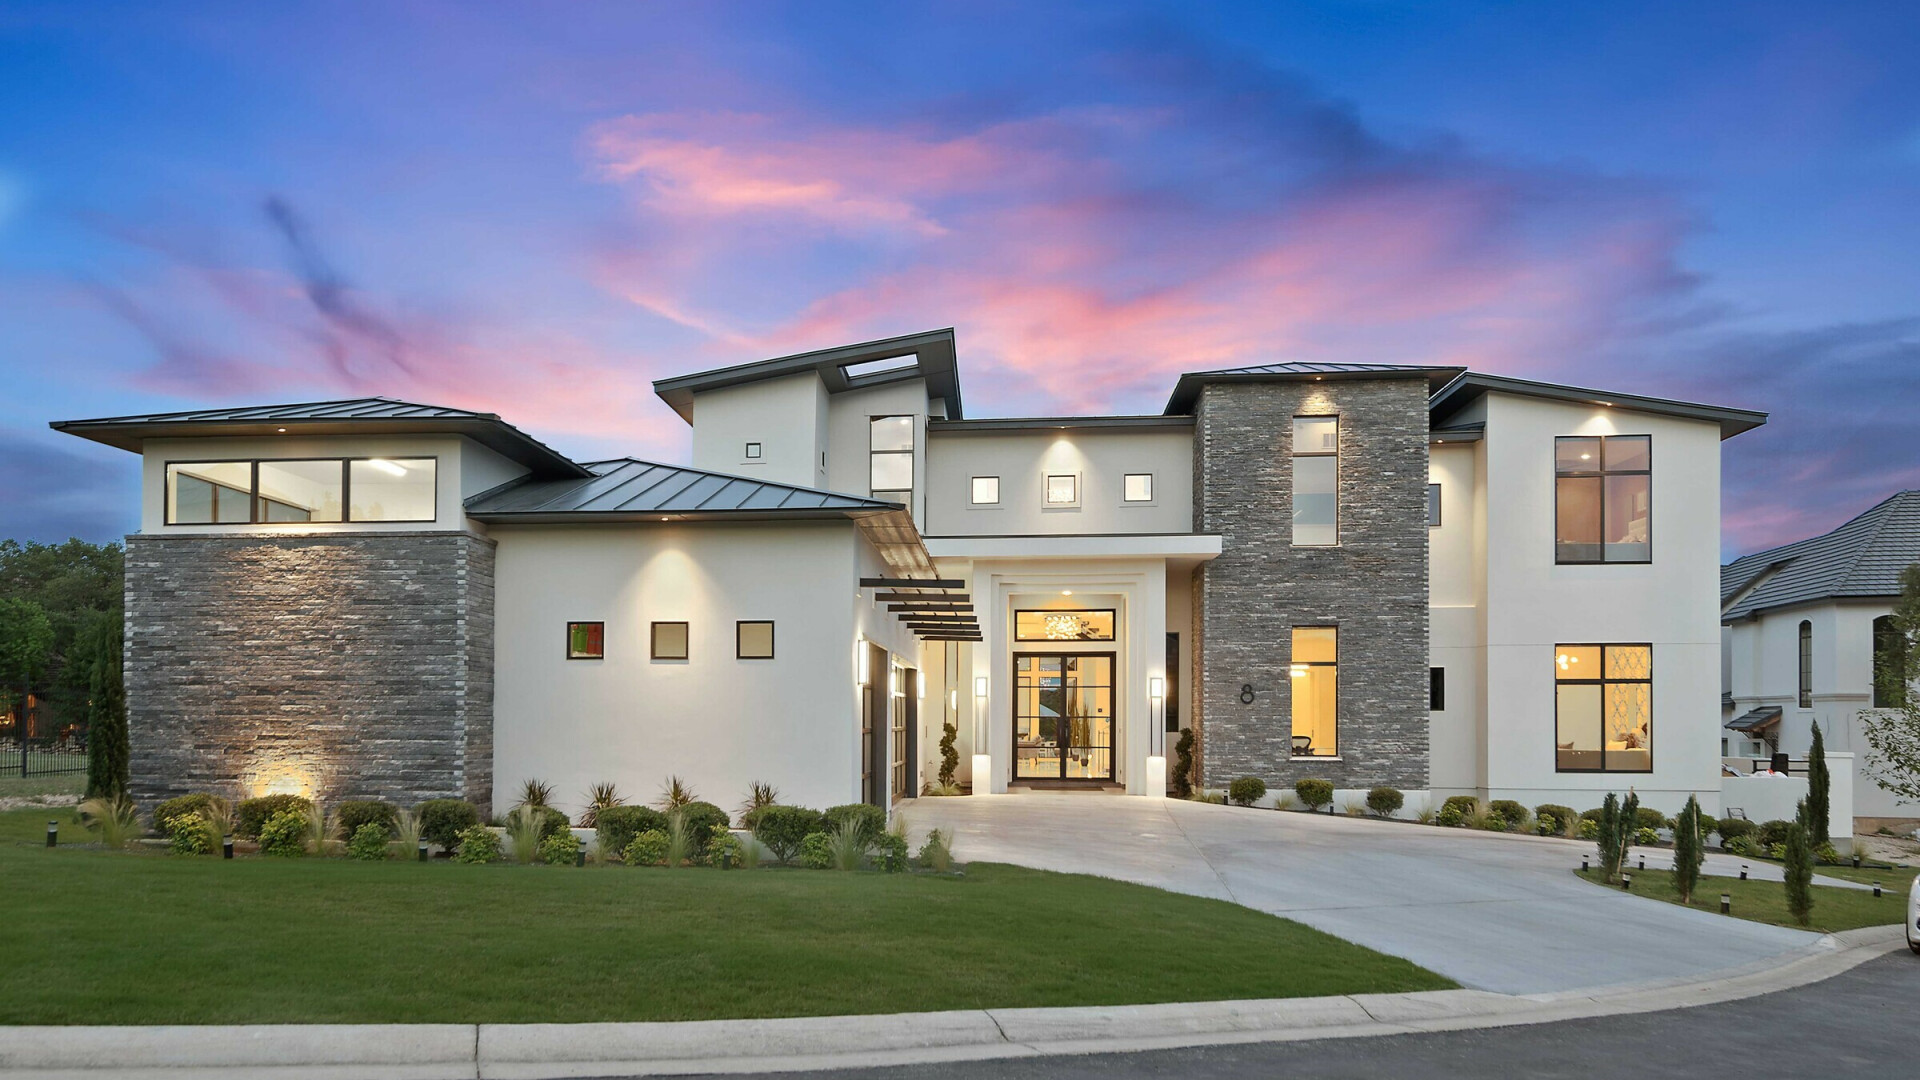 Front view of luxury modern home at sunset, San Antonio TX